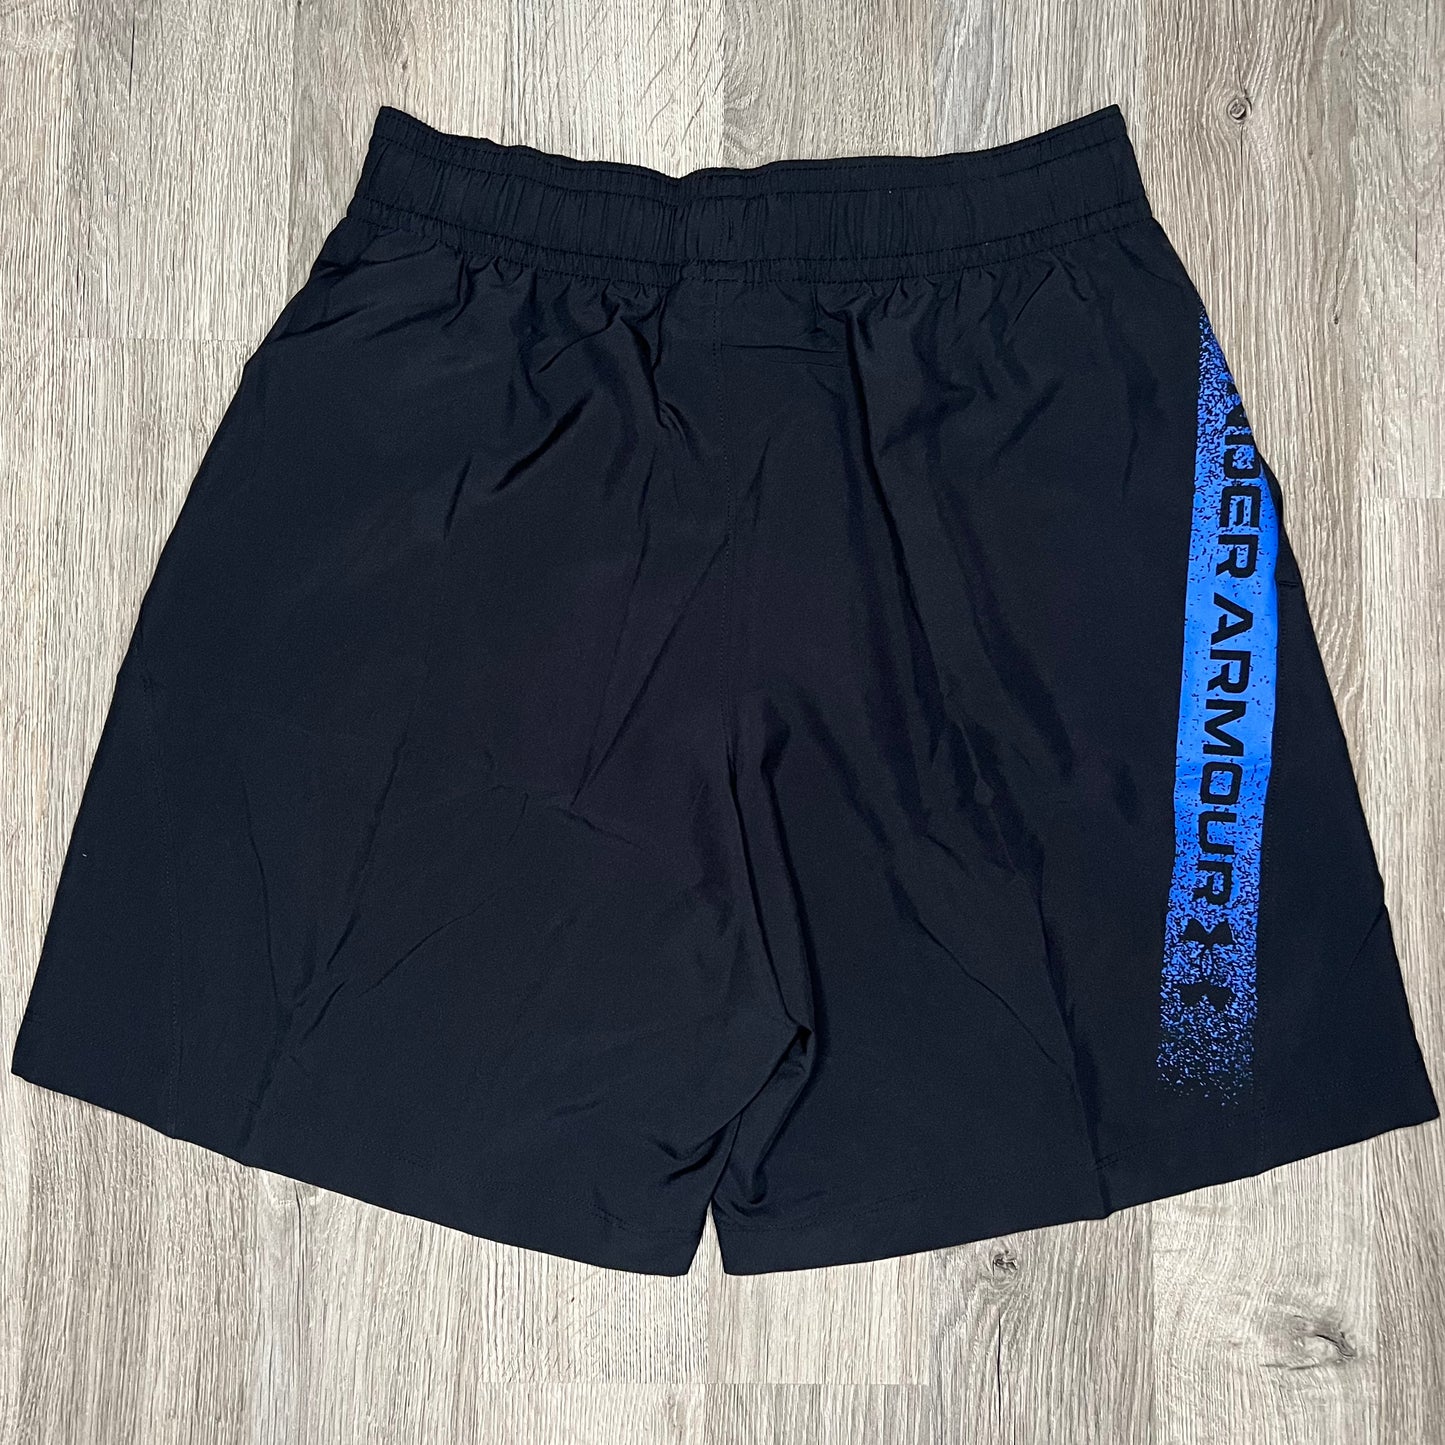 Under Armour Graphic Woven Shorts Black Blue